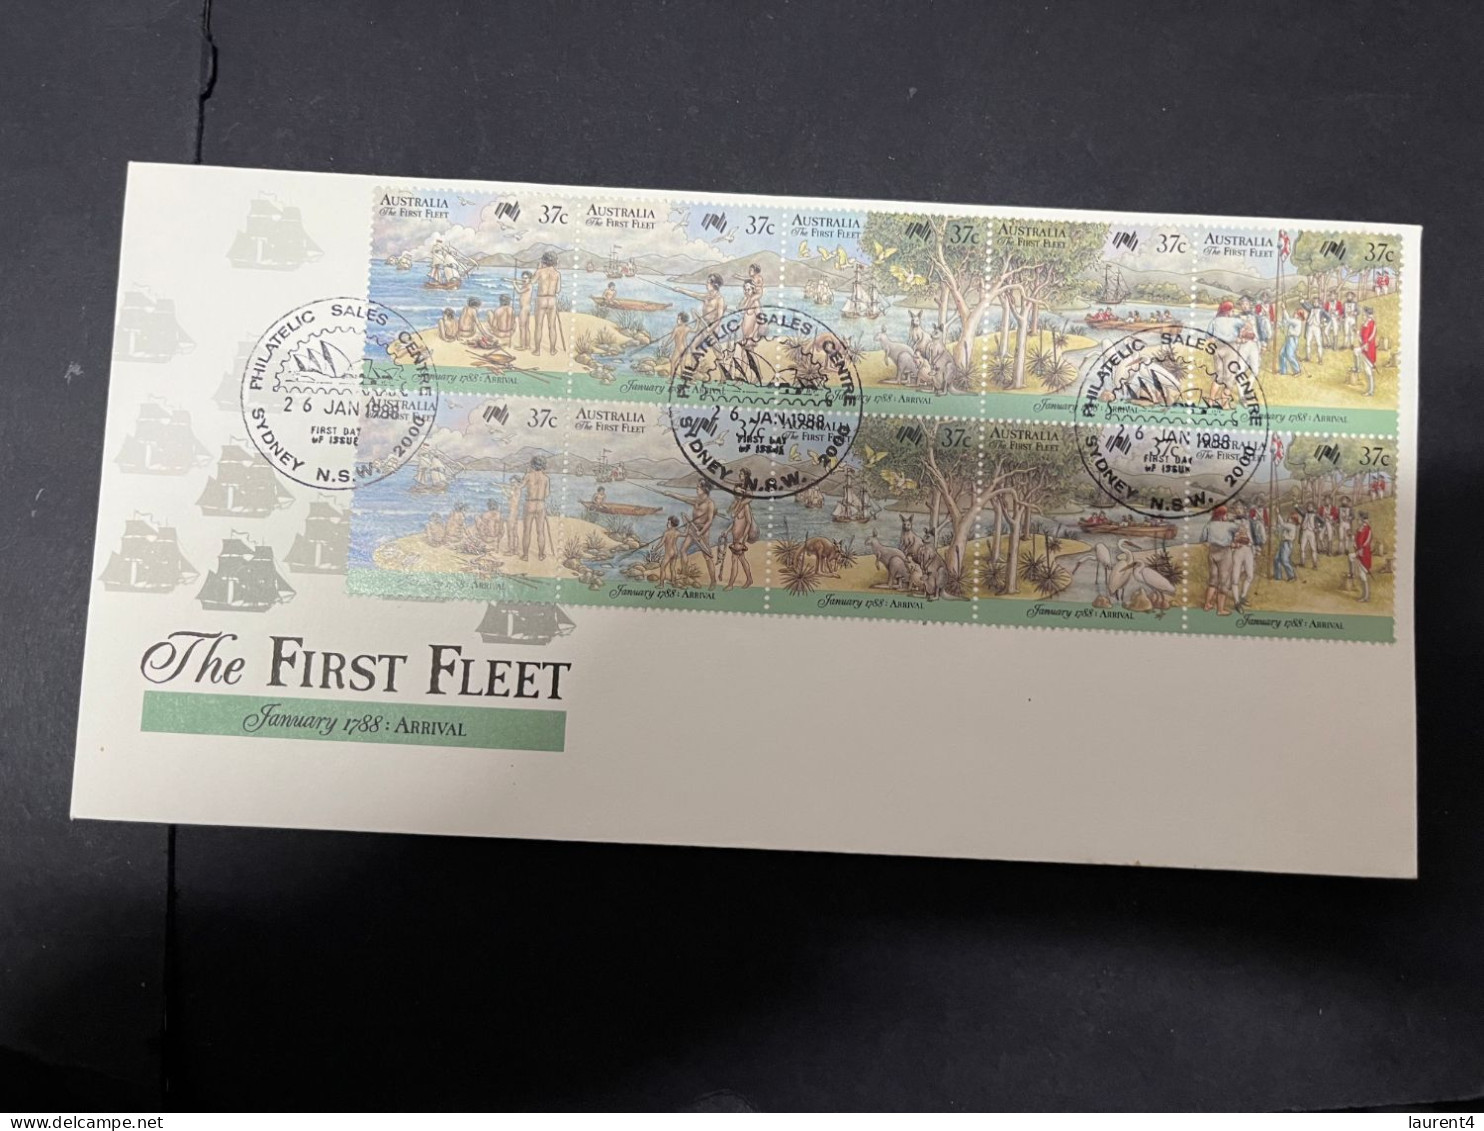 11-5-2024 (4 Z 44)  Australia FDC - 1988 - The First Fleet  - Arrival  (unusual Double Strip And P/m) - Premiers Jours (FDC)